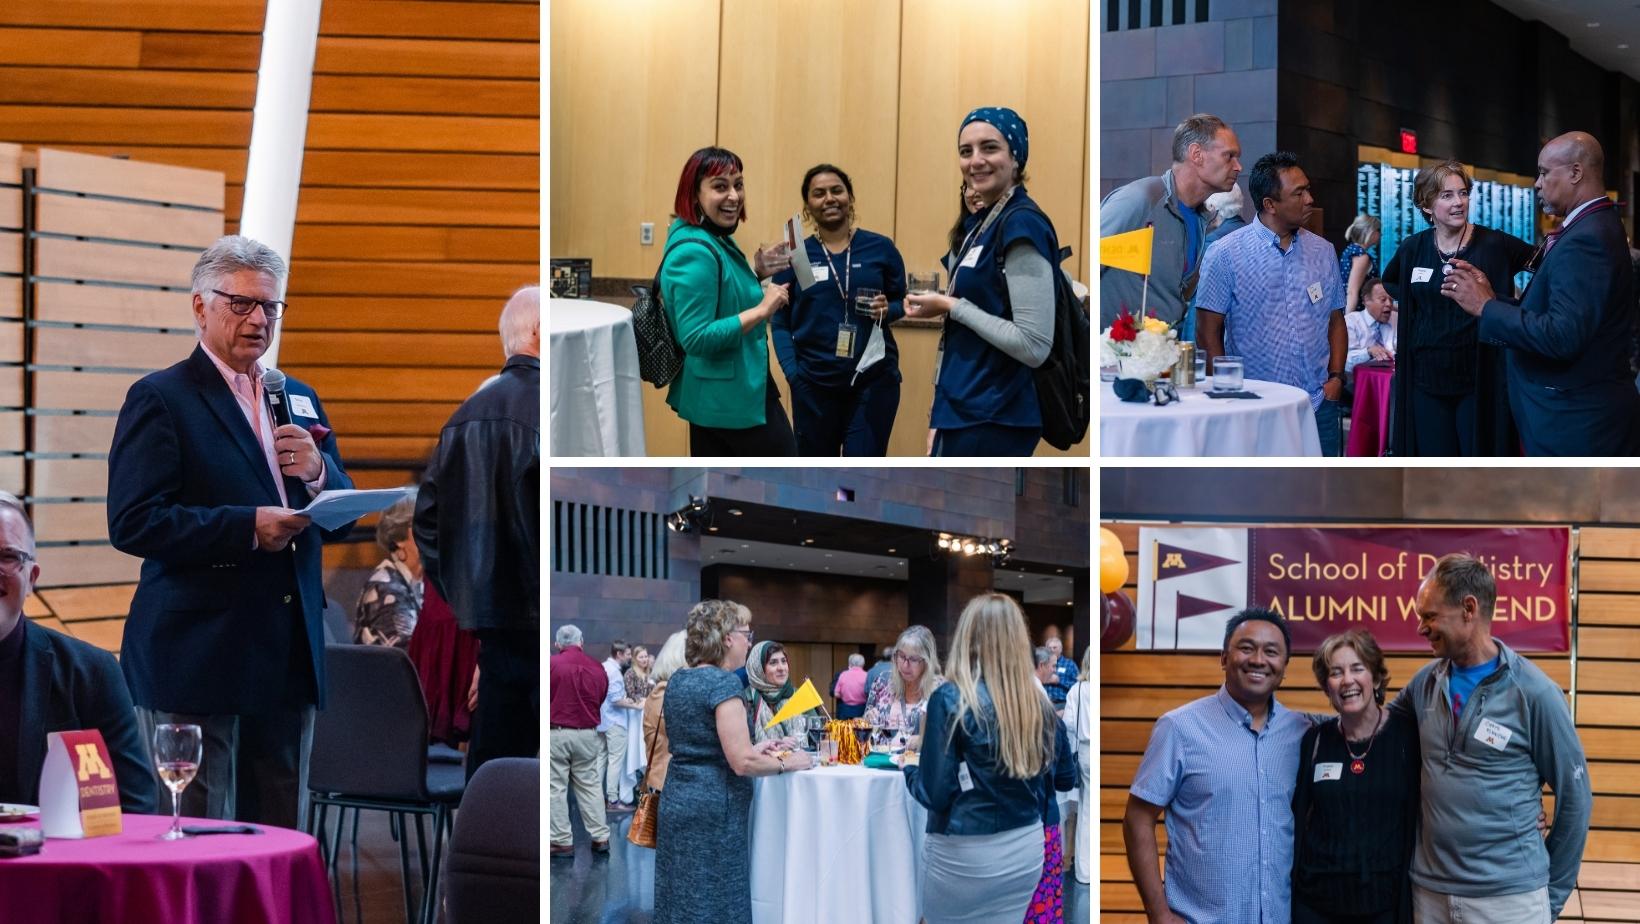 Collage of images from Alumni Reception